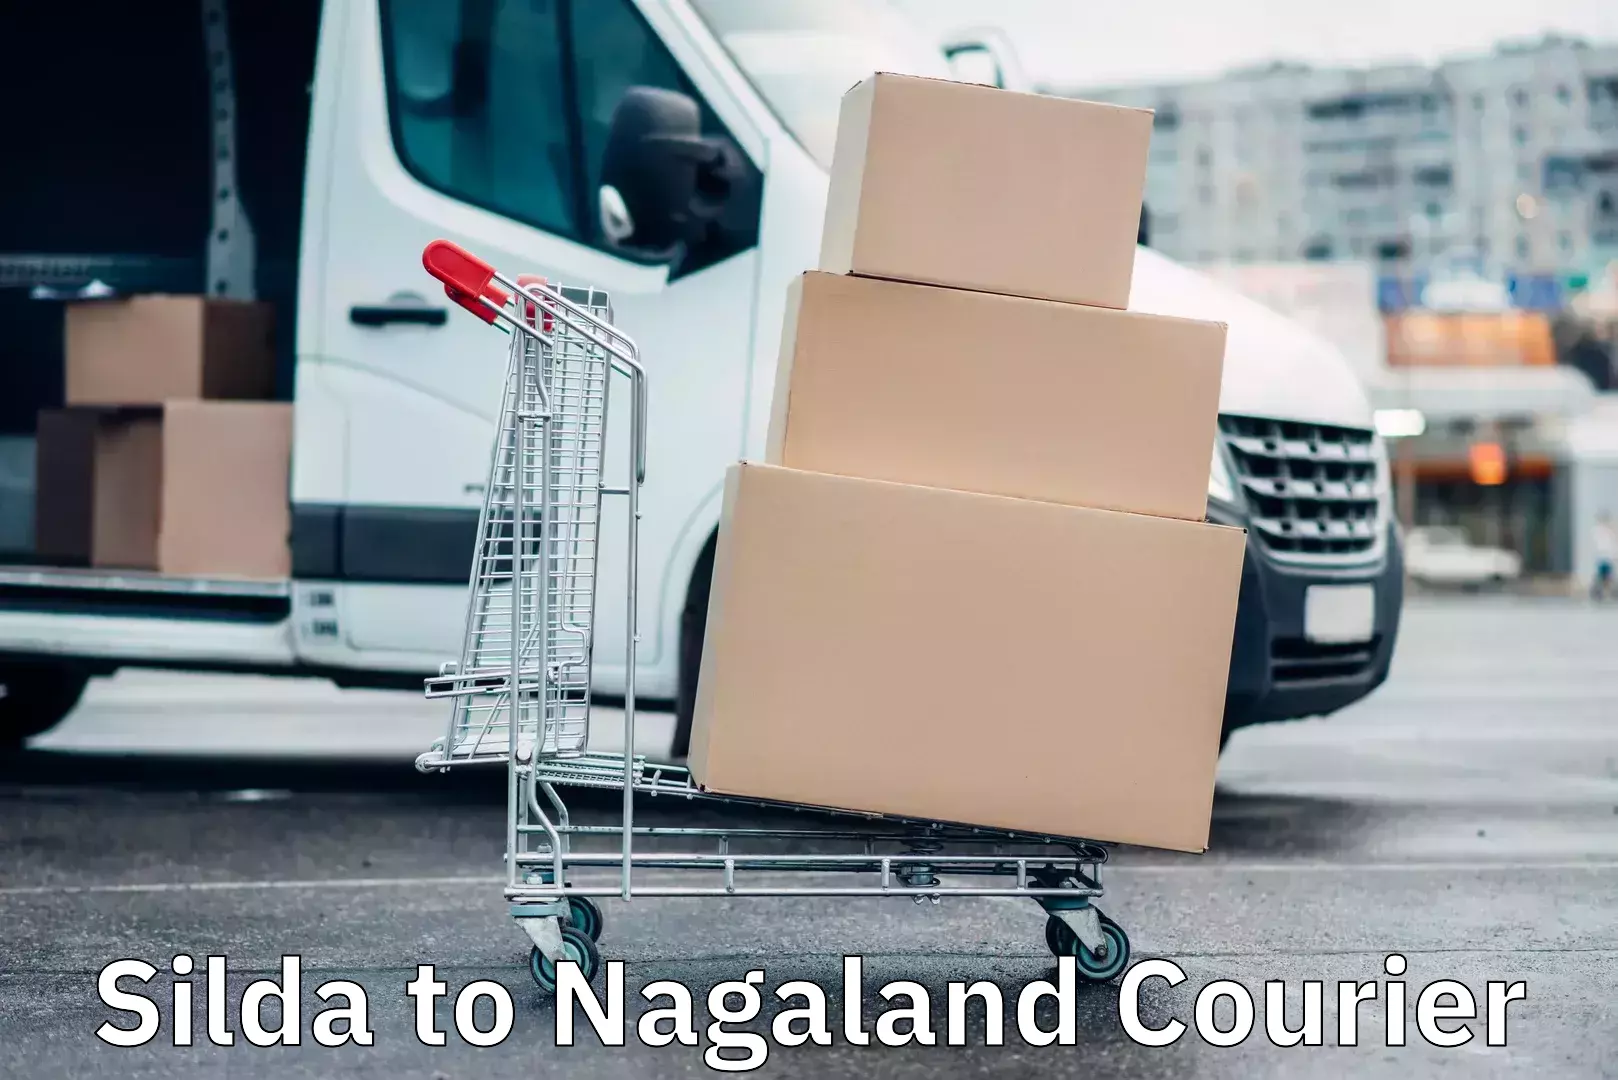 Optimized delivery routes Silda to Nagaland